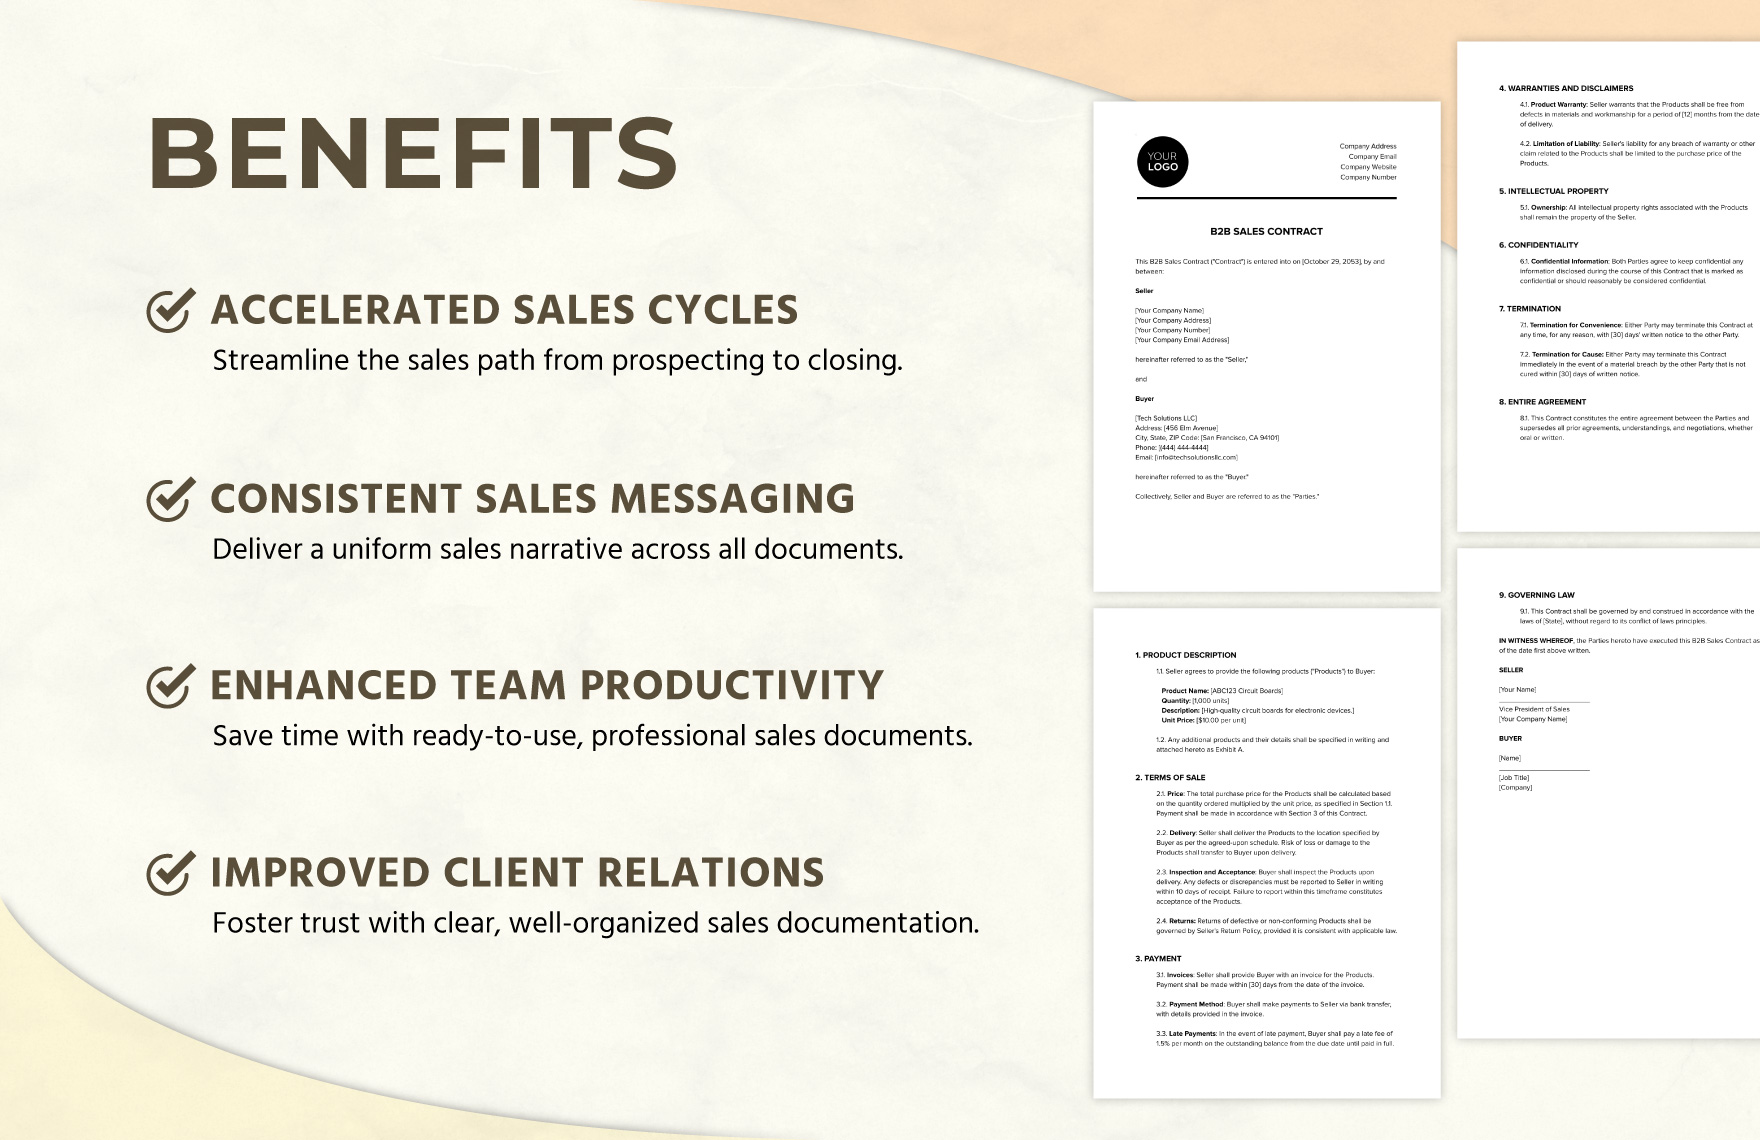 B2B Sales Contract Template